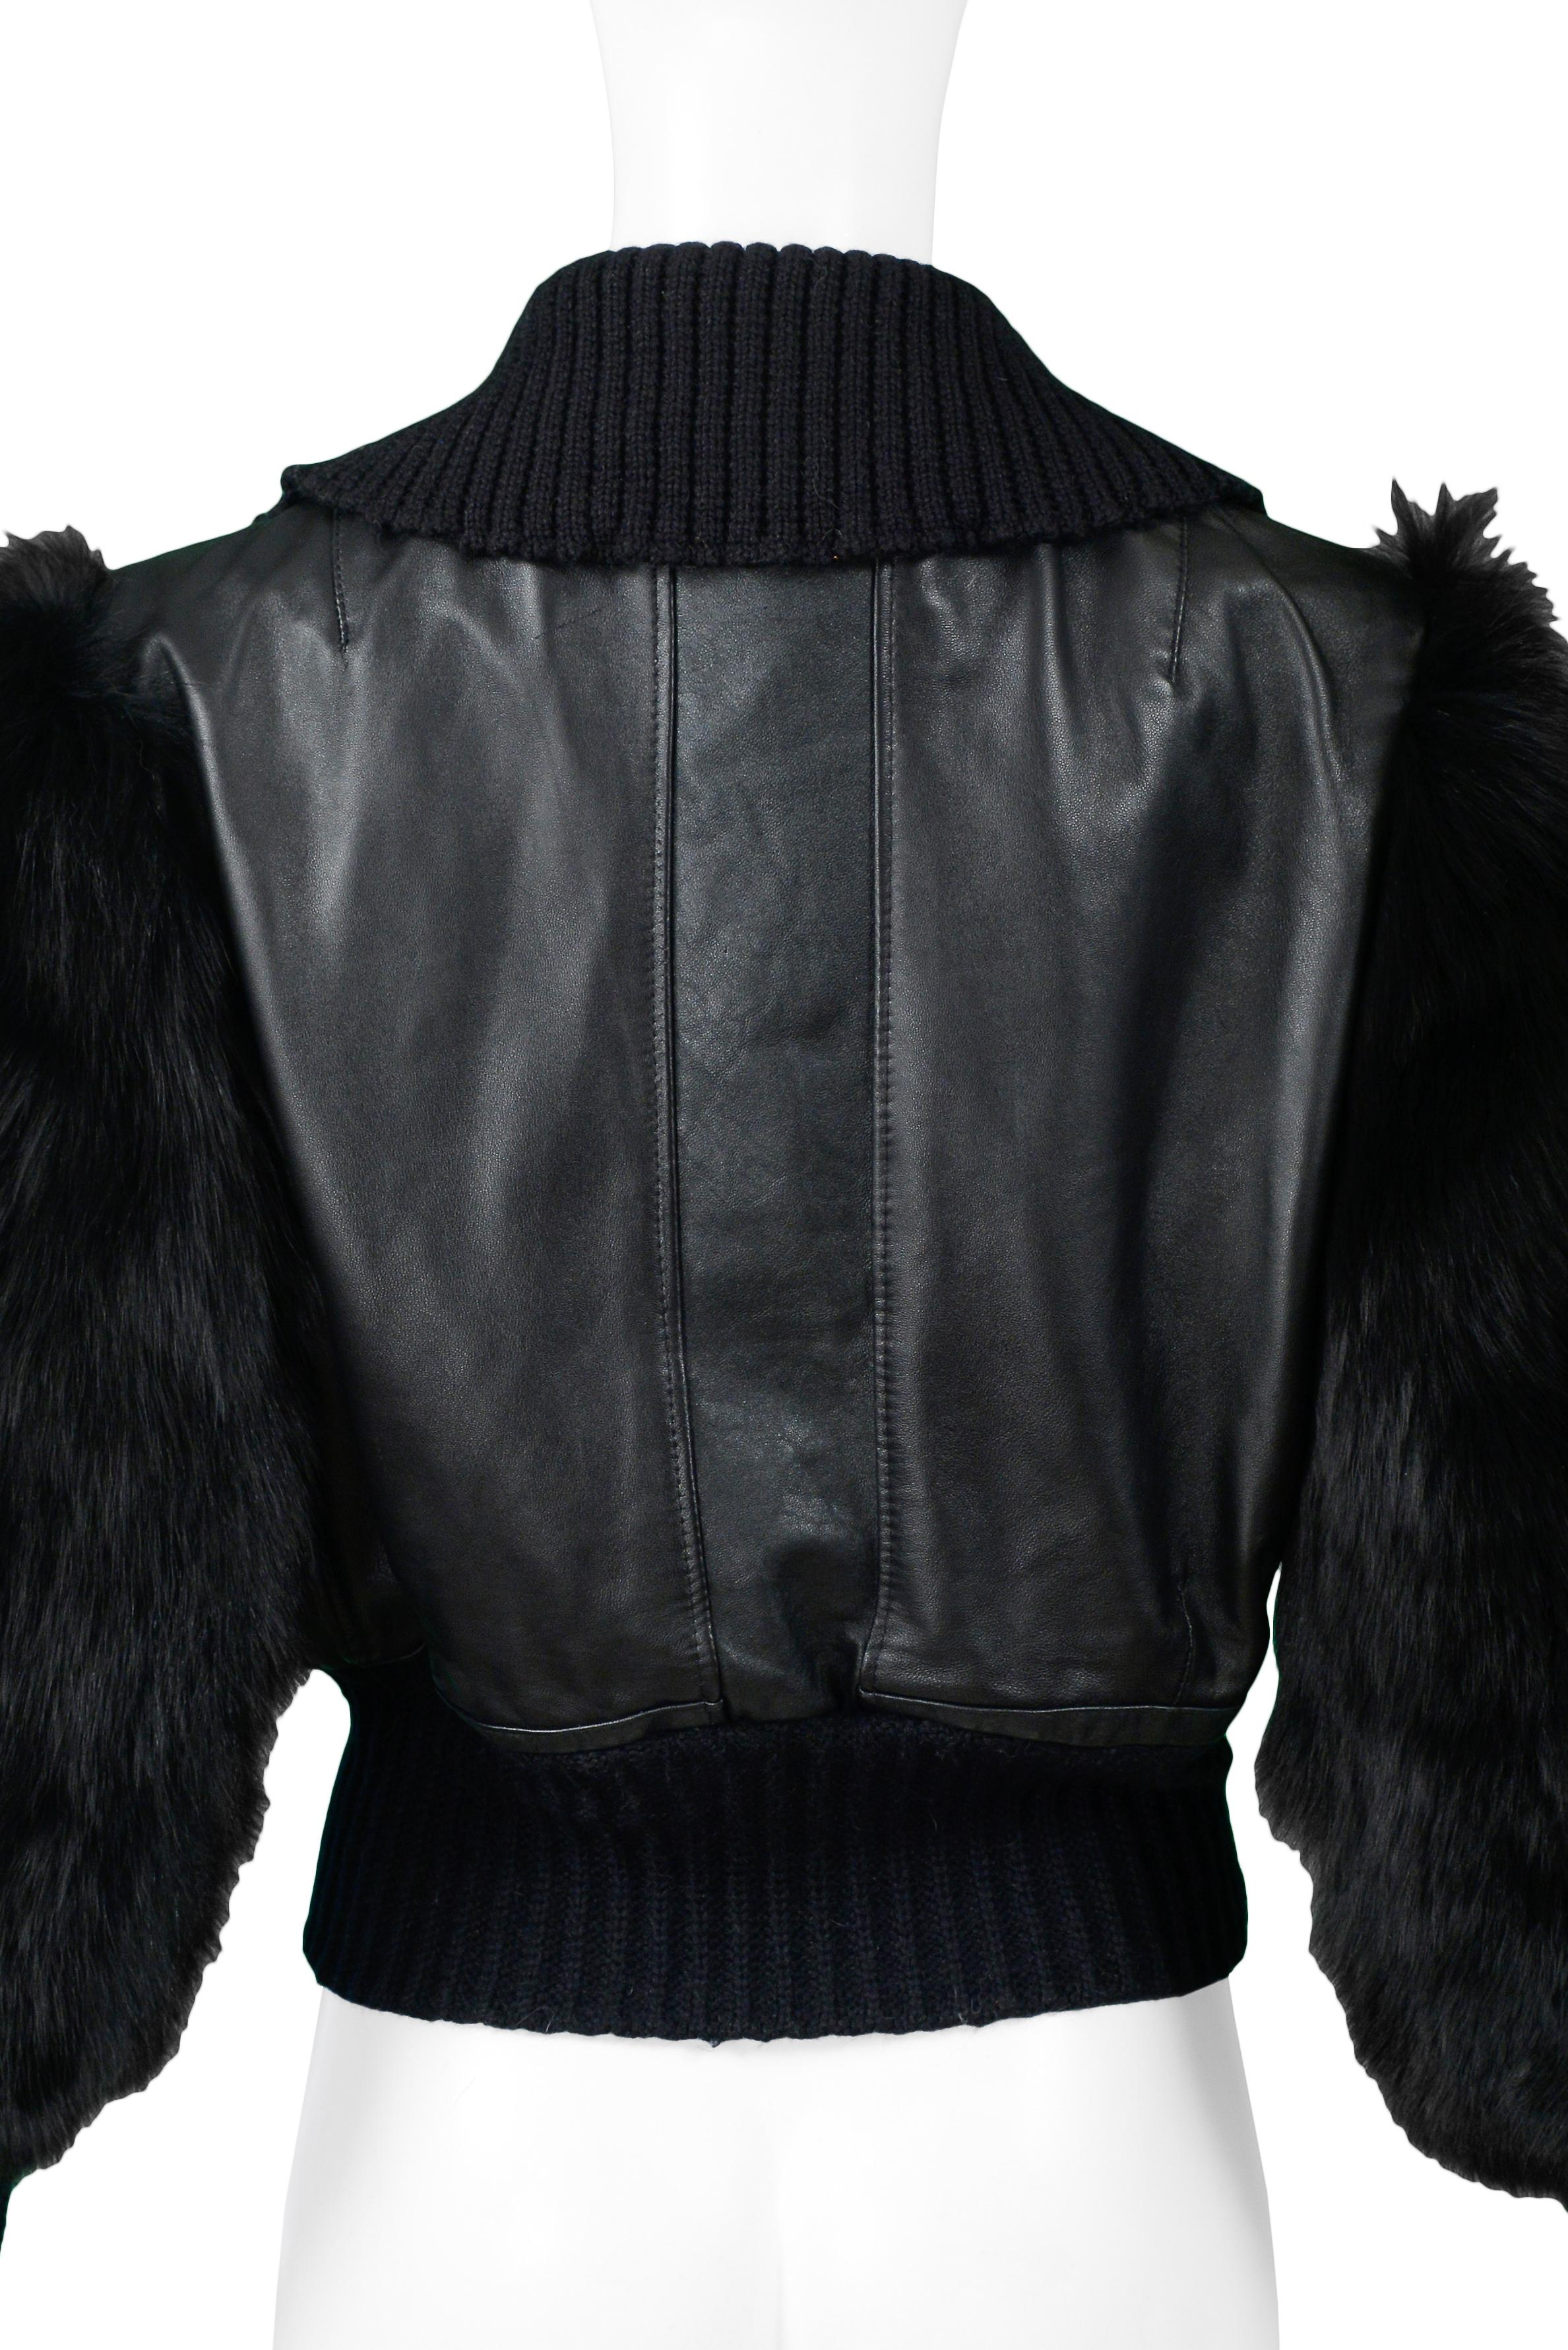 Gucci By Tom Ford Leather & Fox Fur Jacket 2003 For Sale 2